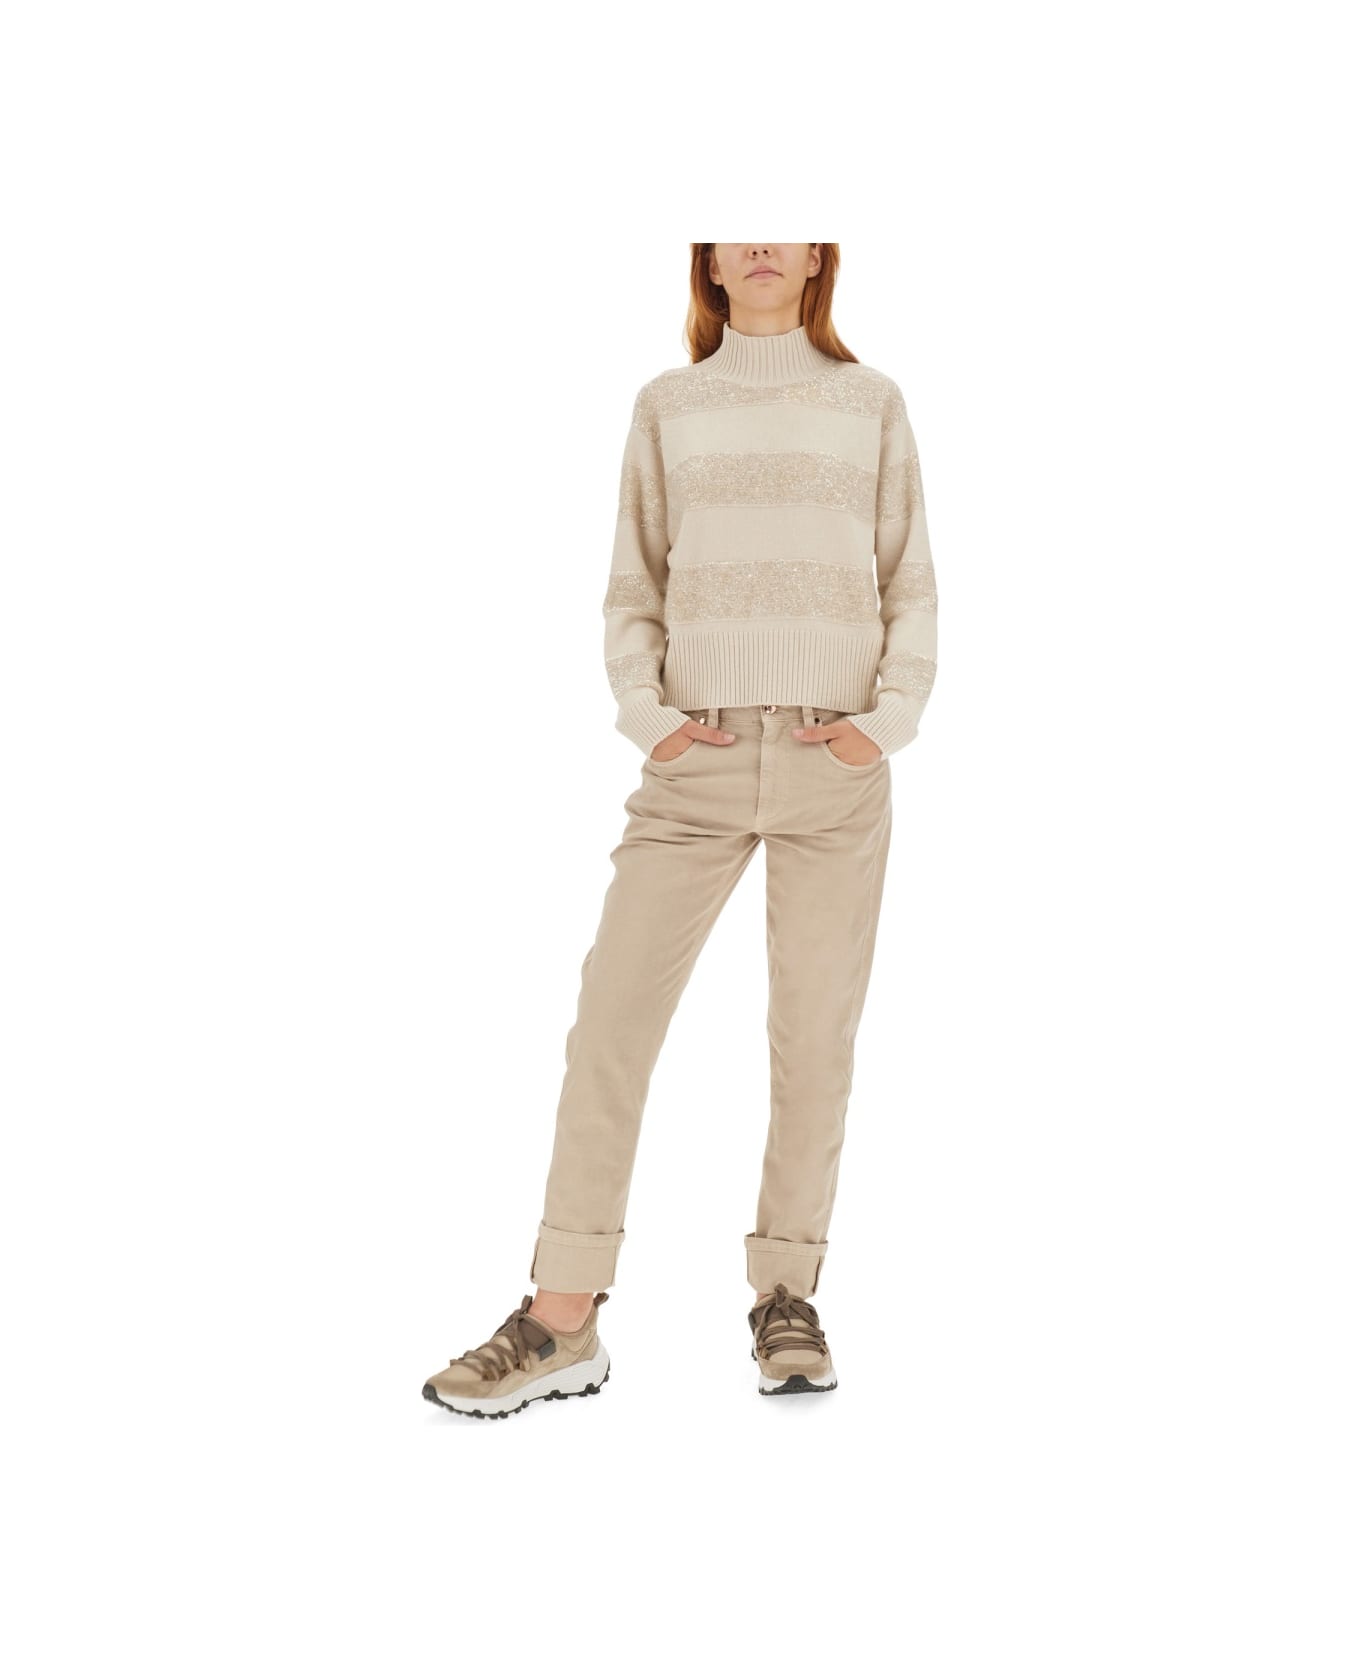 Brunello Cucinelli Skinny Fit Jeans - BEIGE ボトムス